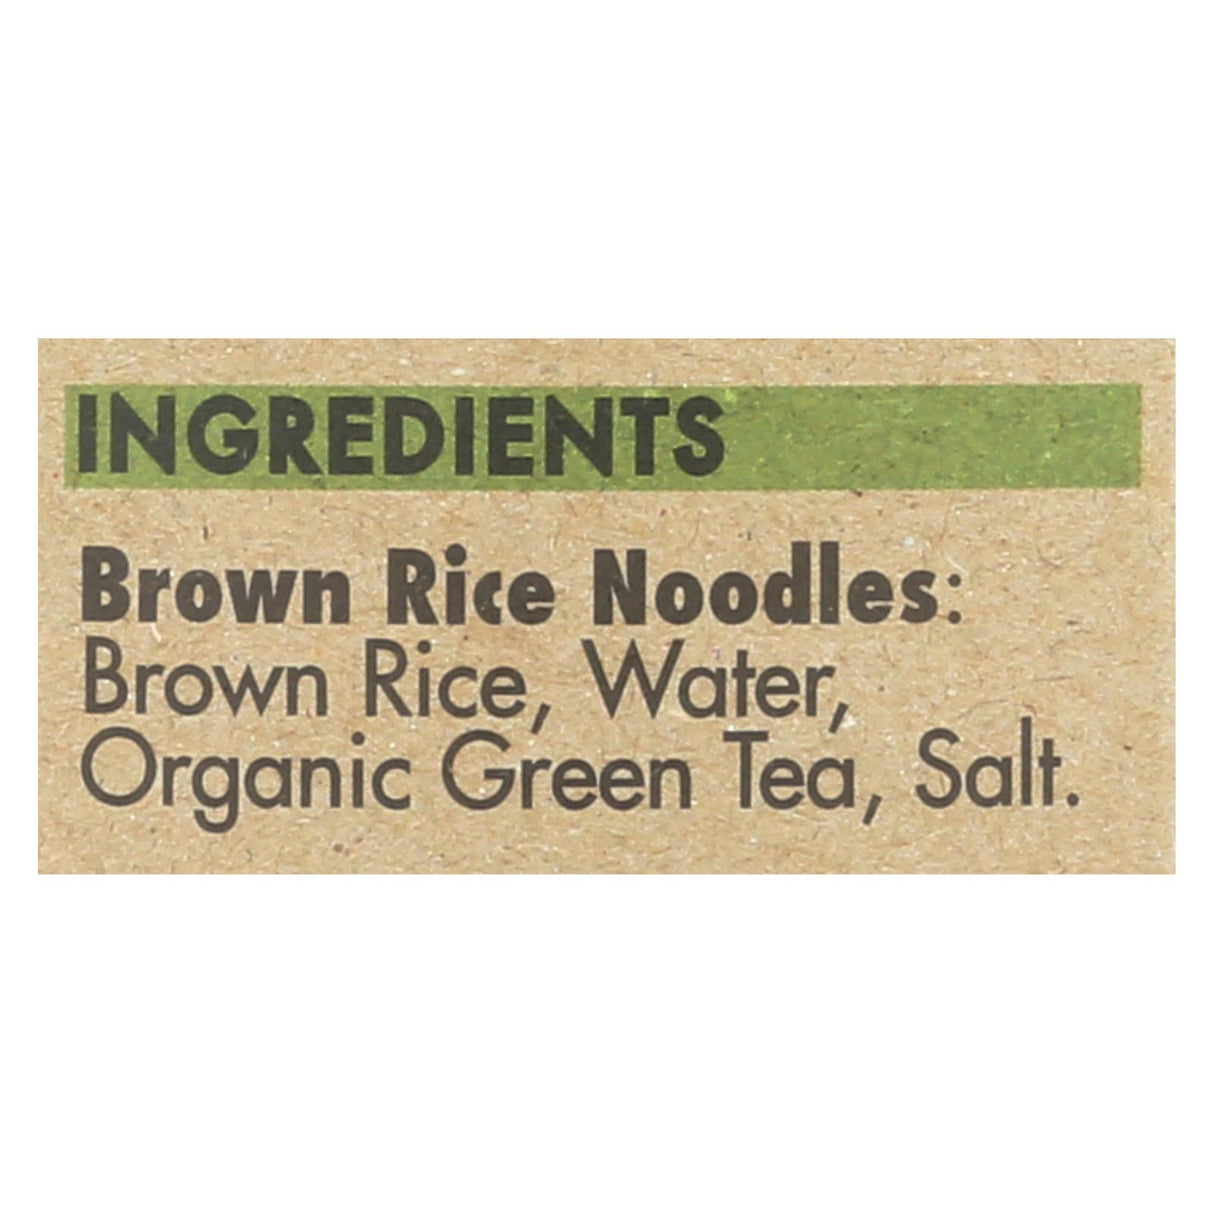 Star Anise Foods Brown Rice Vietnamese Noodles with Organic Green Tea (Pack of 6) - 8.6 Oz - Cozy Farm 